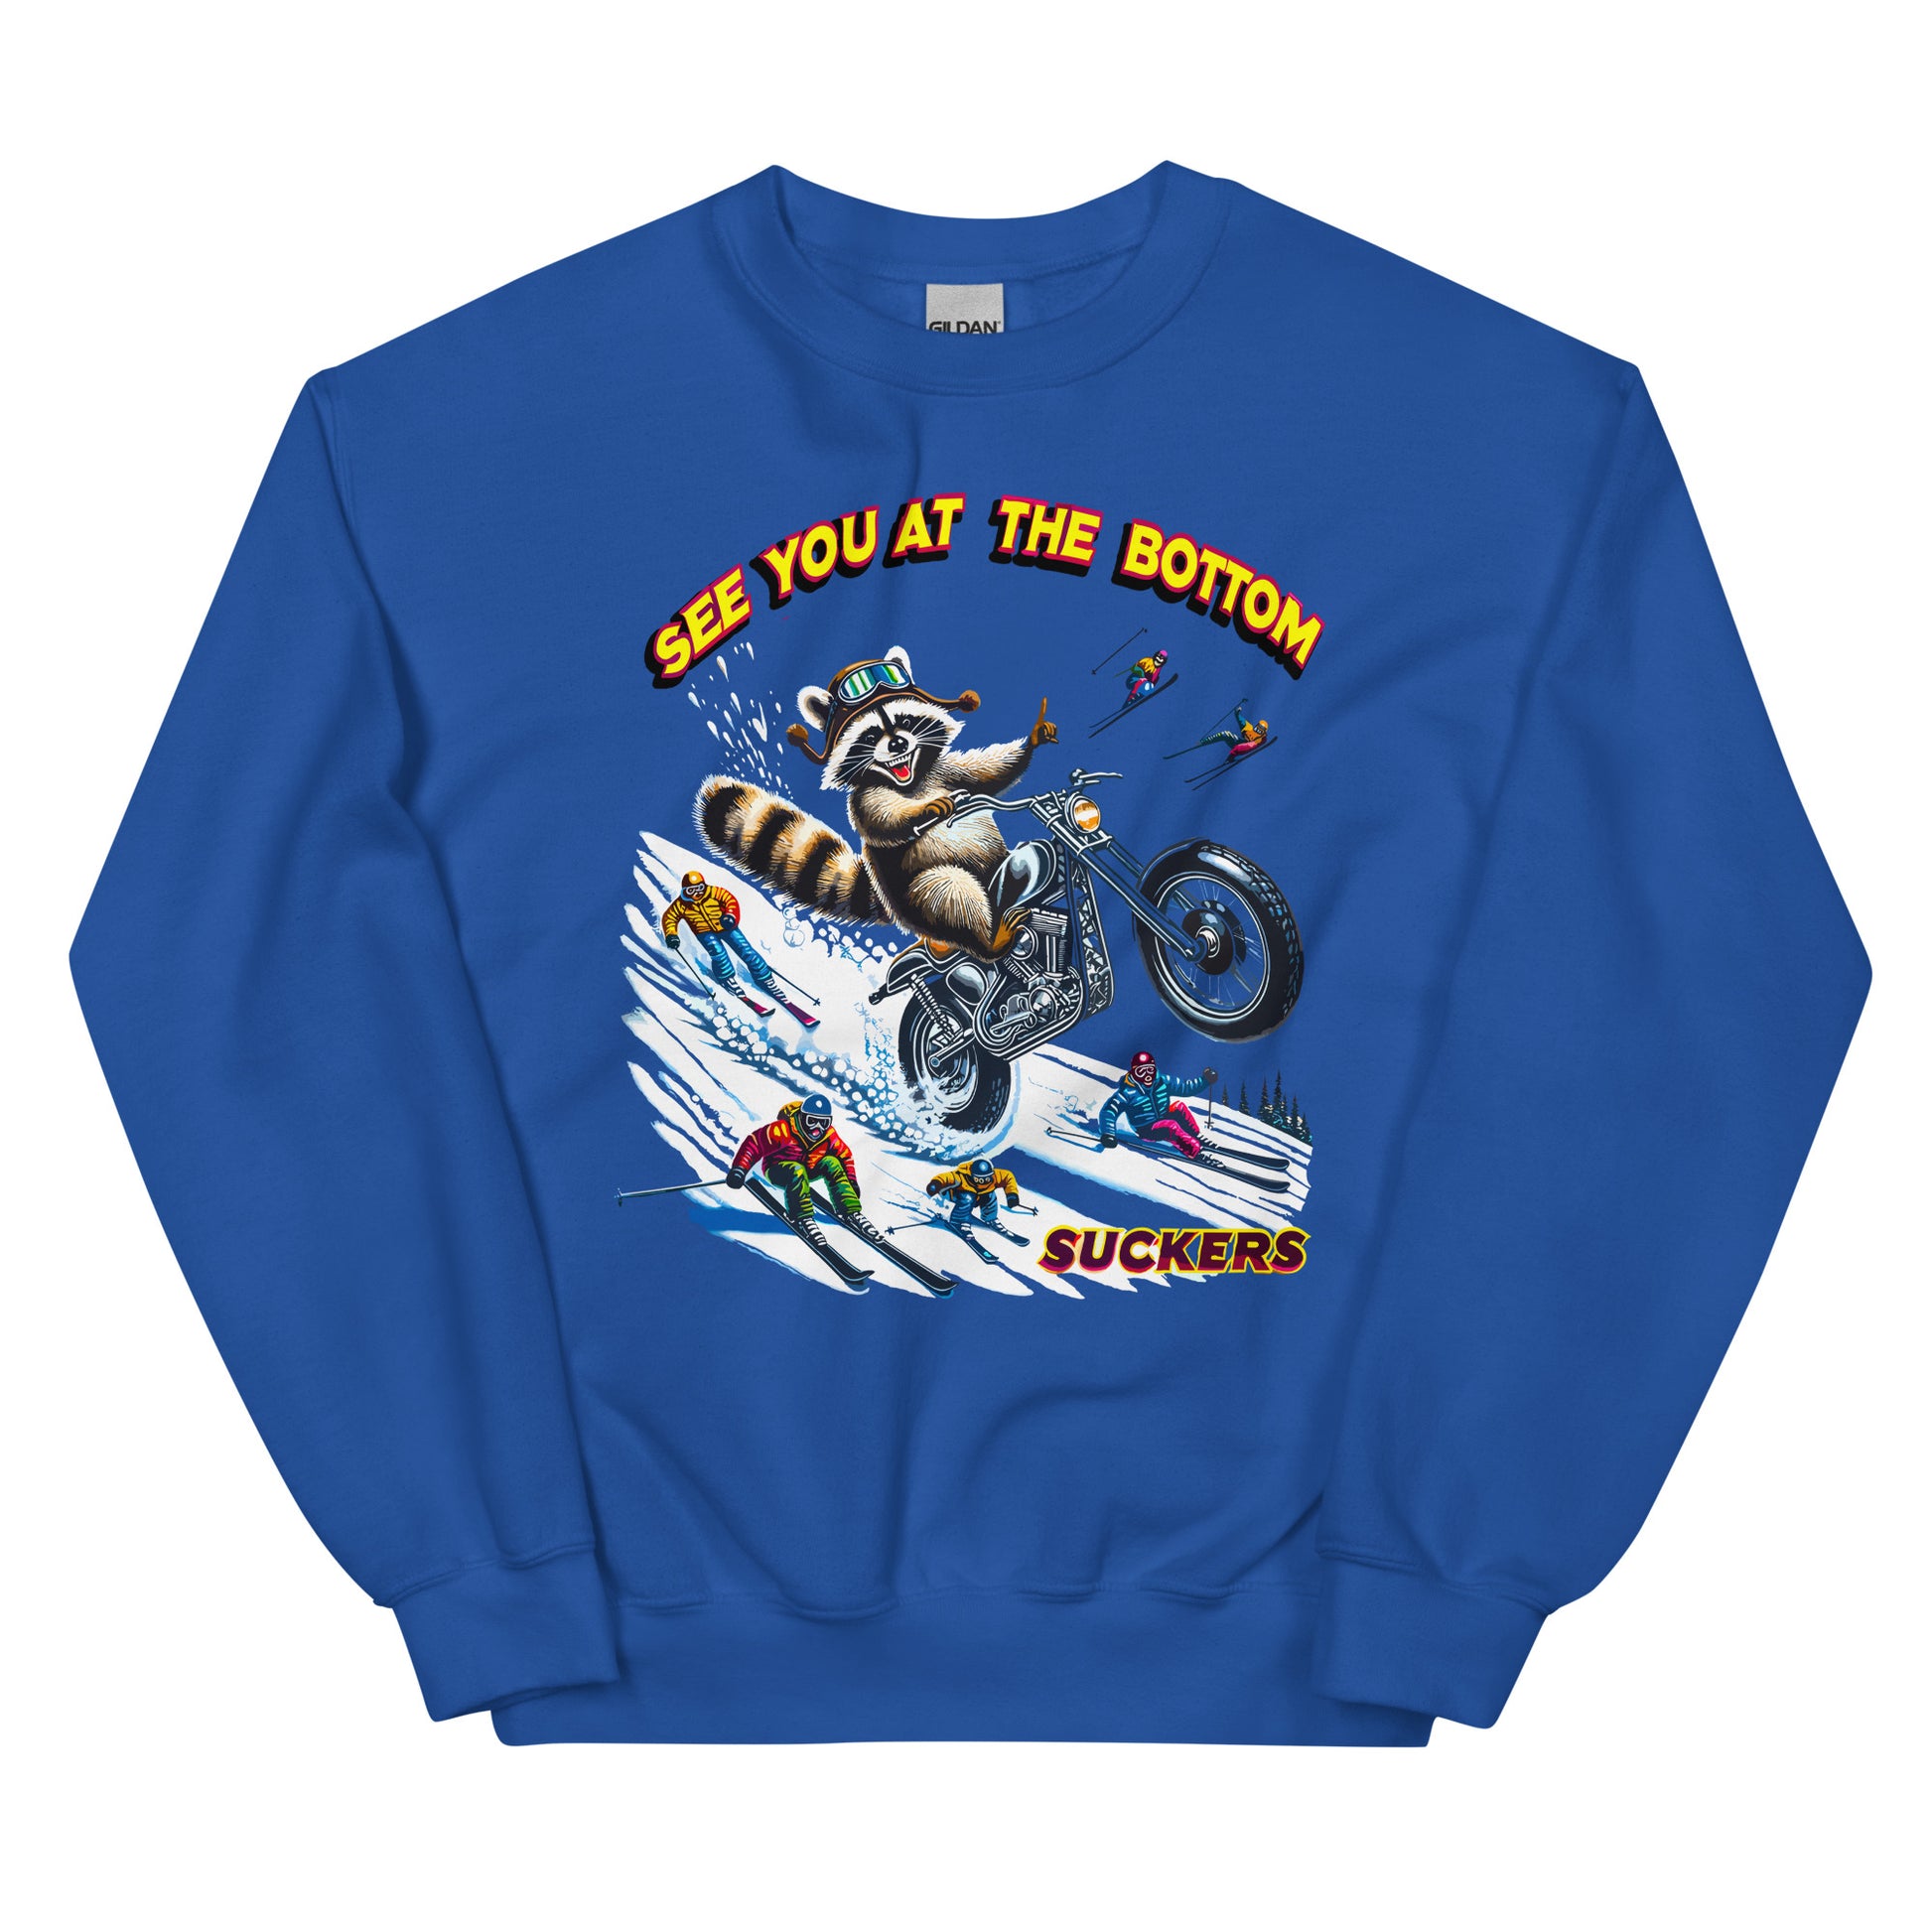 See you at the bottom suckers, racoon biking down the mountain printed crewneck sweatshirt by Whistler Shirts